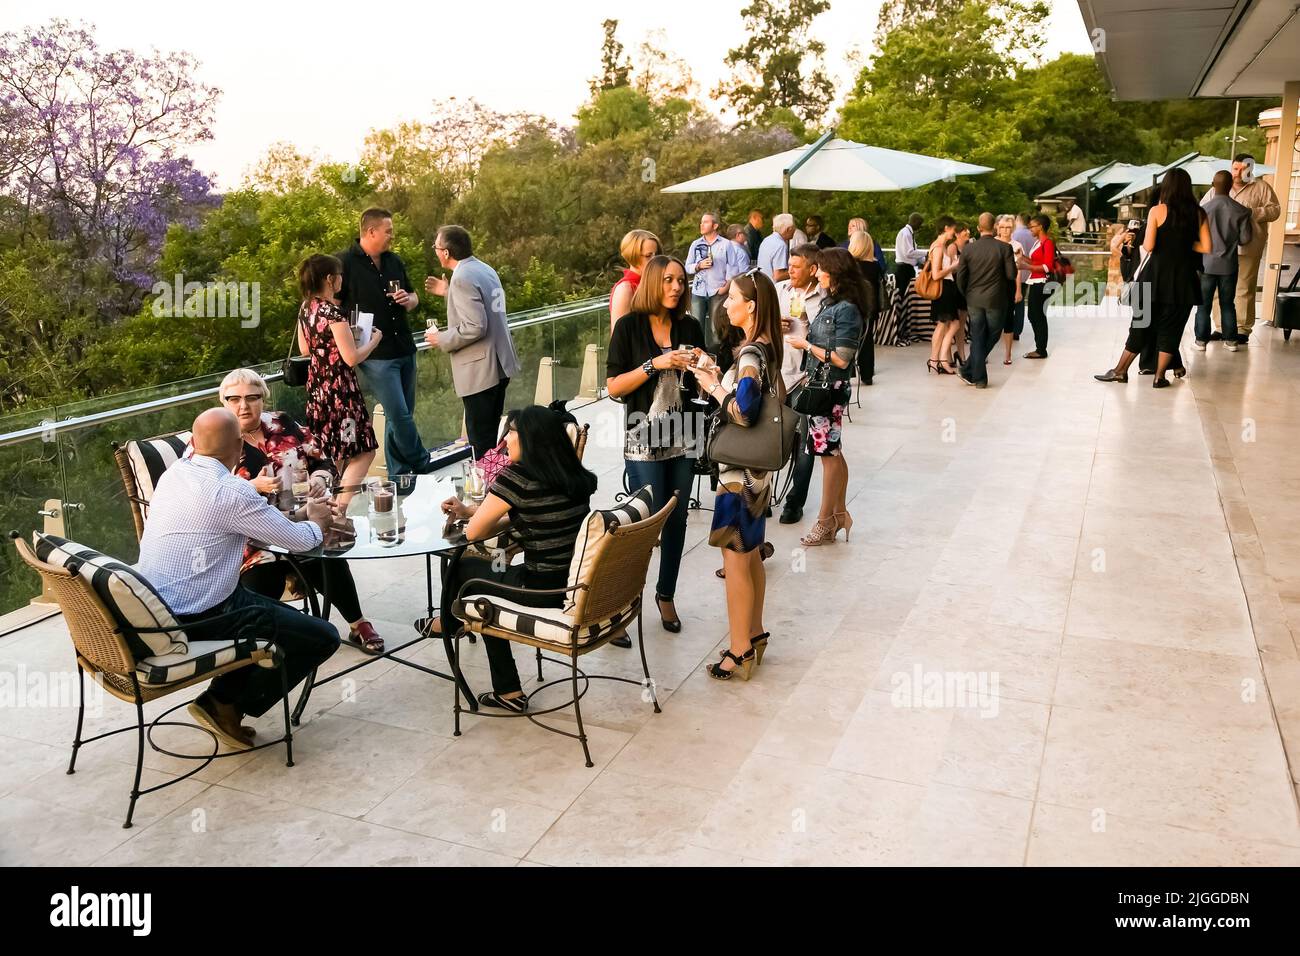 Diverse people socializing at an outdoor cocktail party in Johannesburg, South Africa Stock Photo